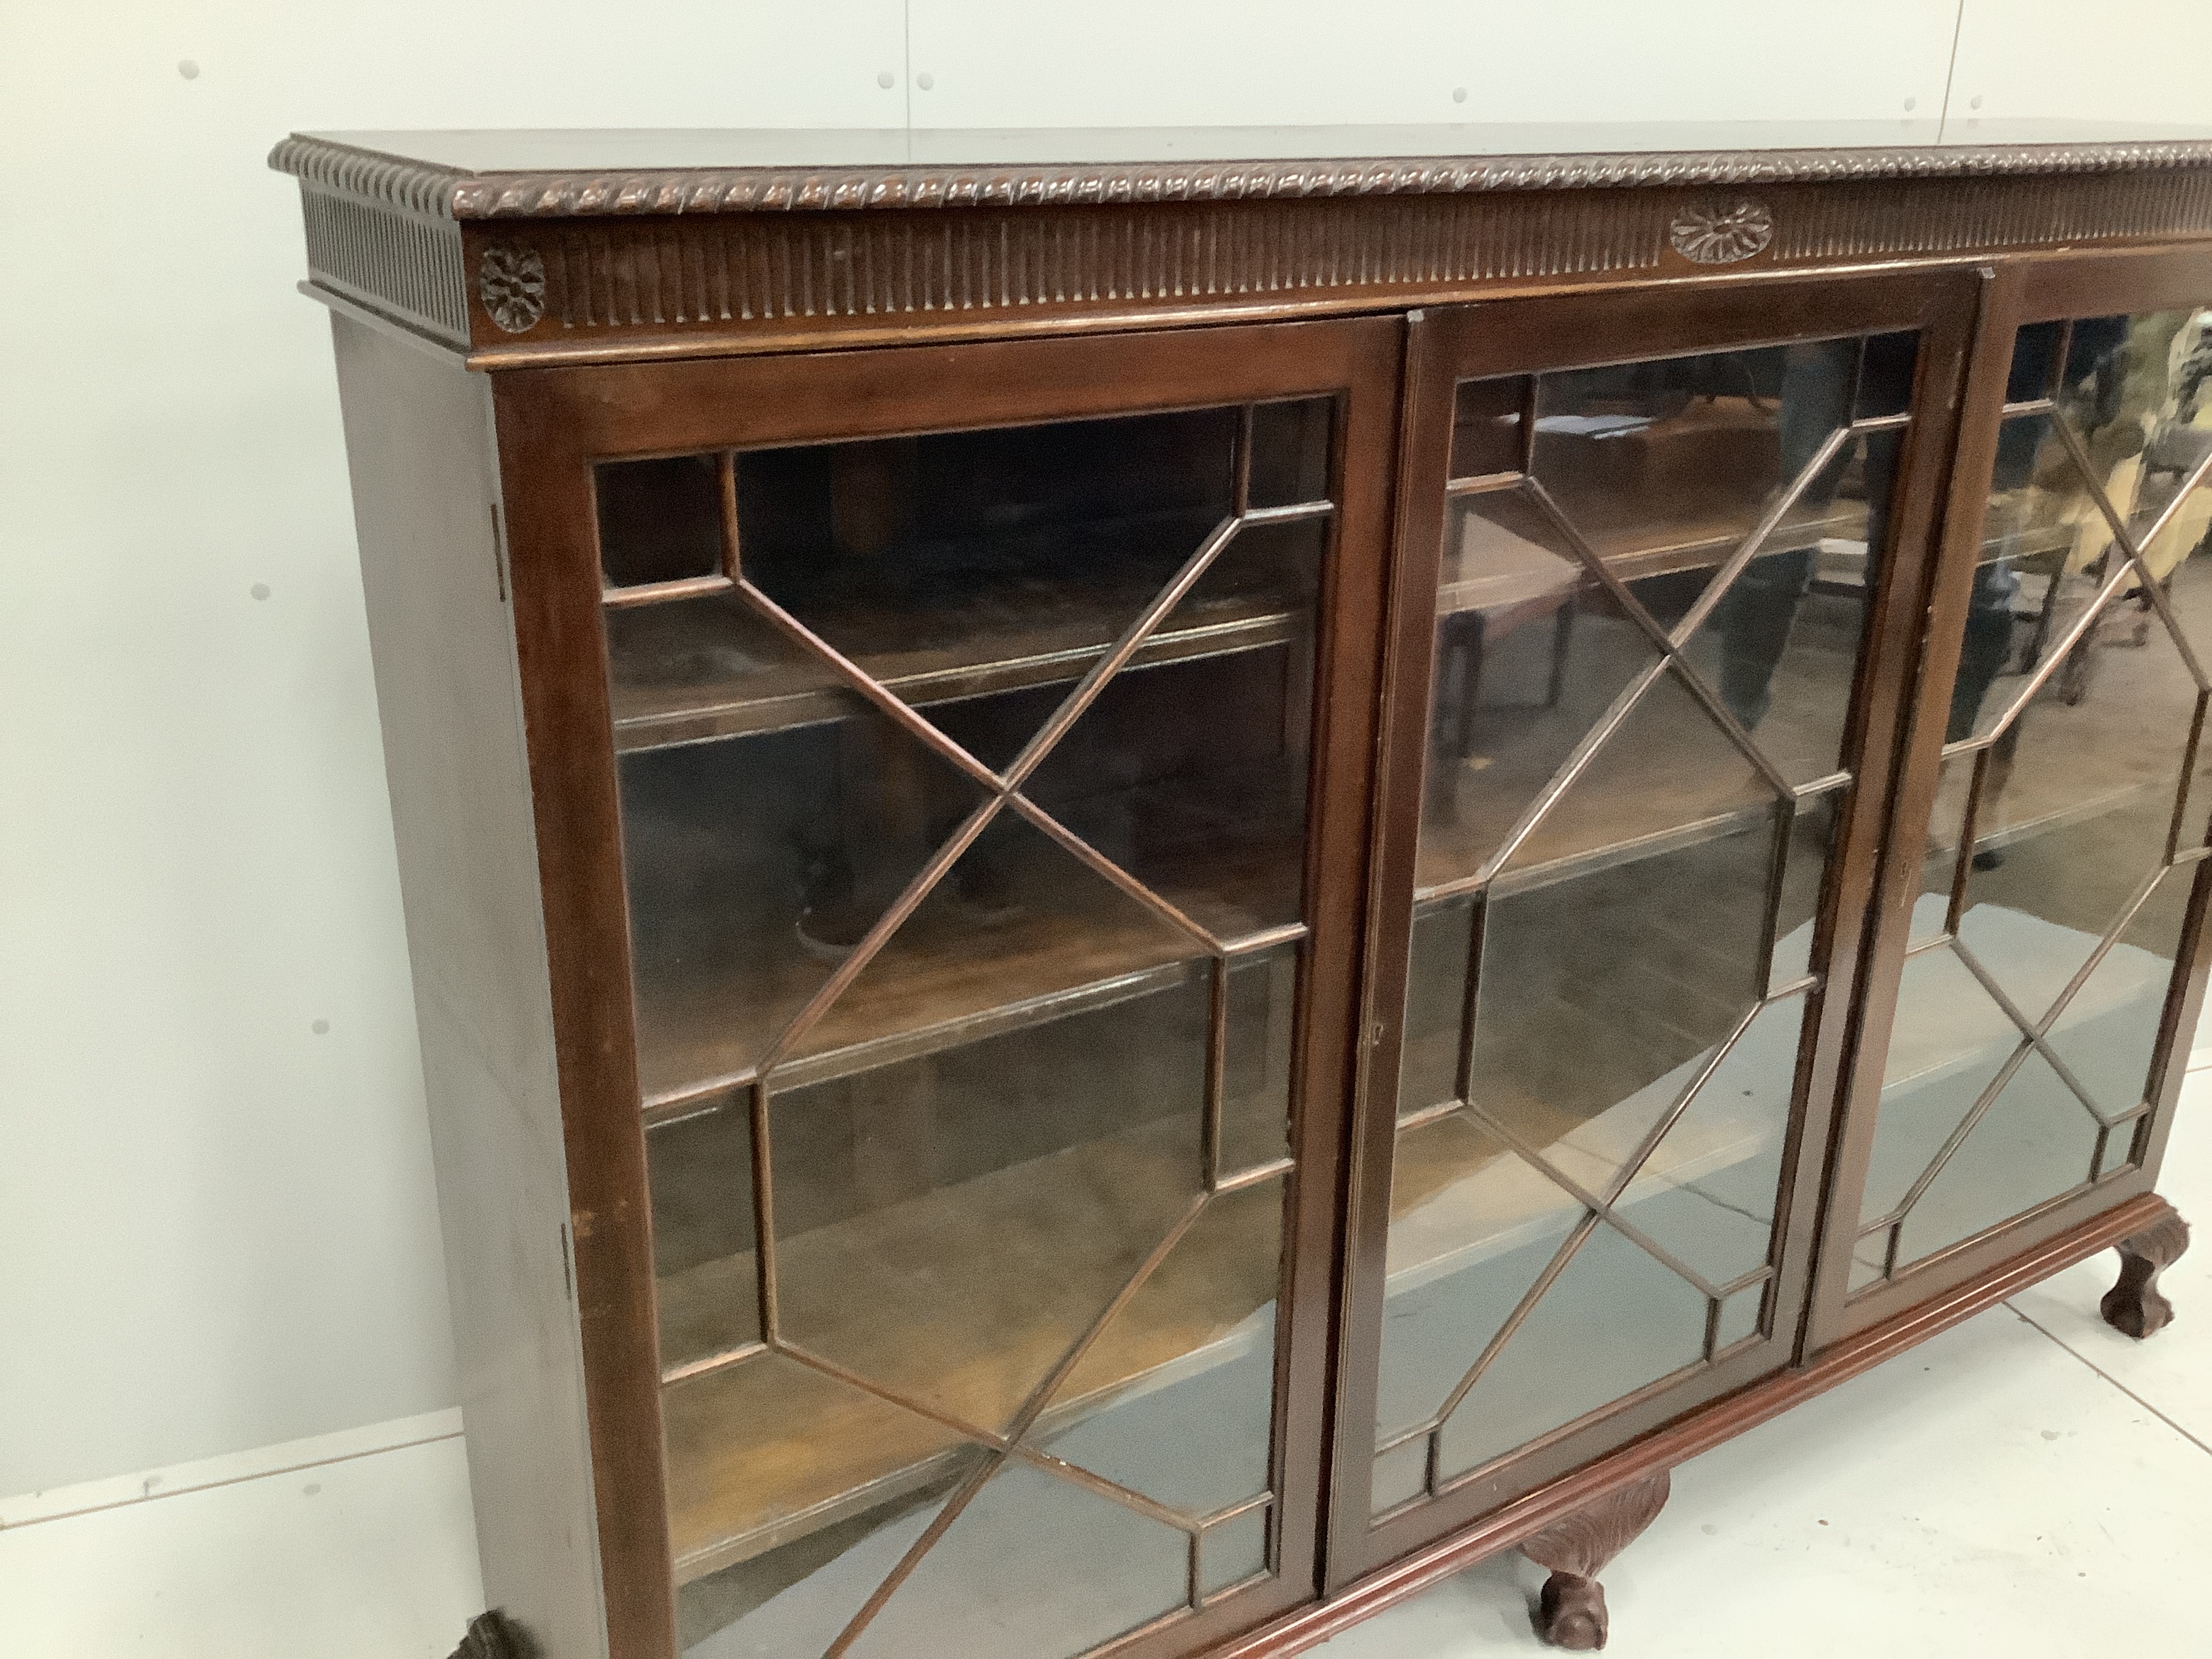 A 1920’s Chippendale revival glazed mahogany bookcase, width 183cm, depth 38cm, height 132cm